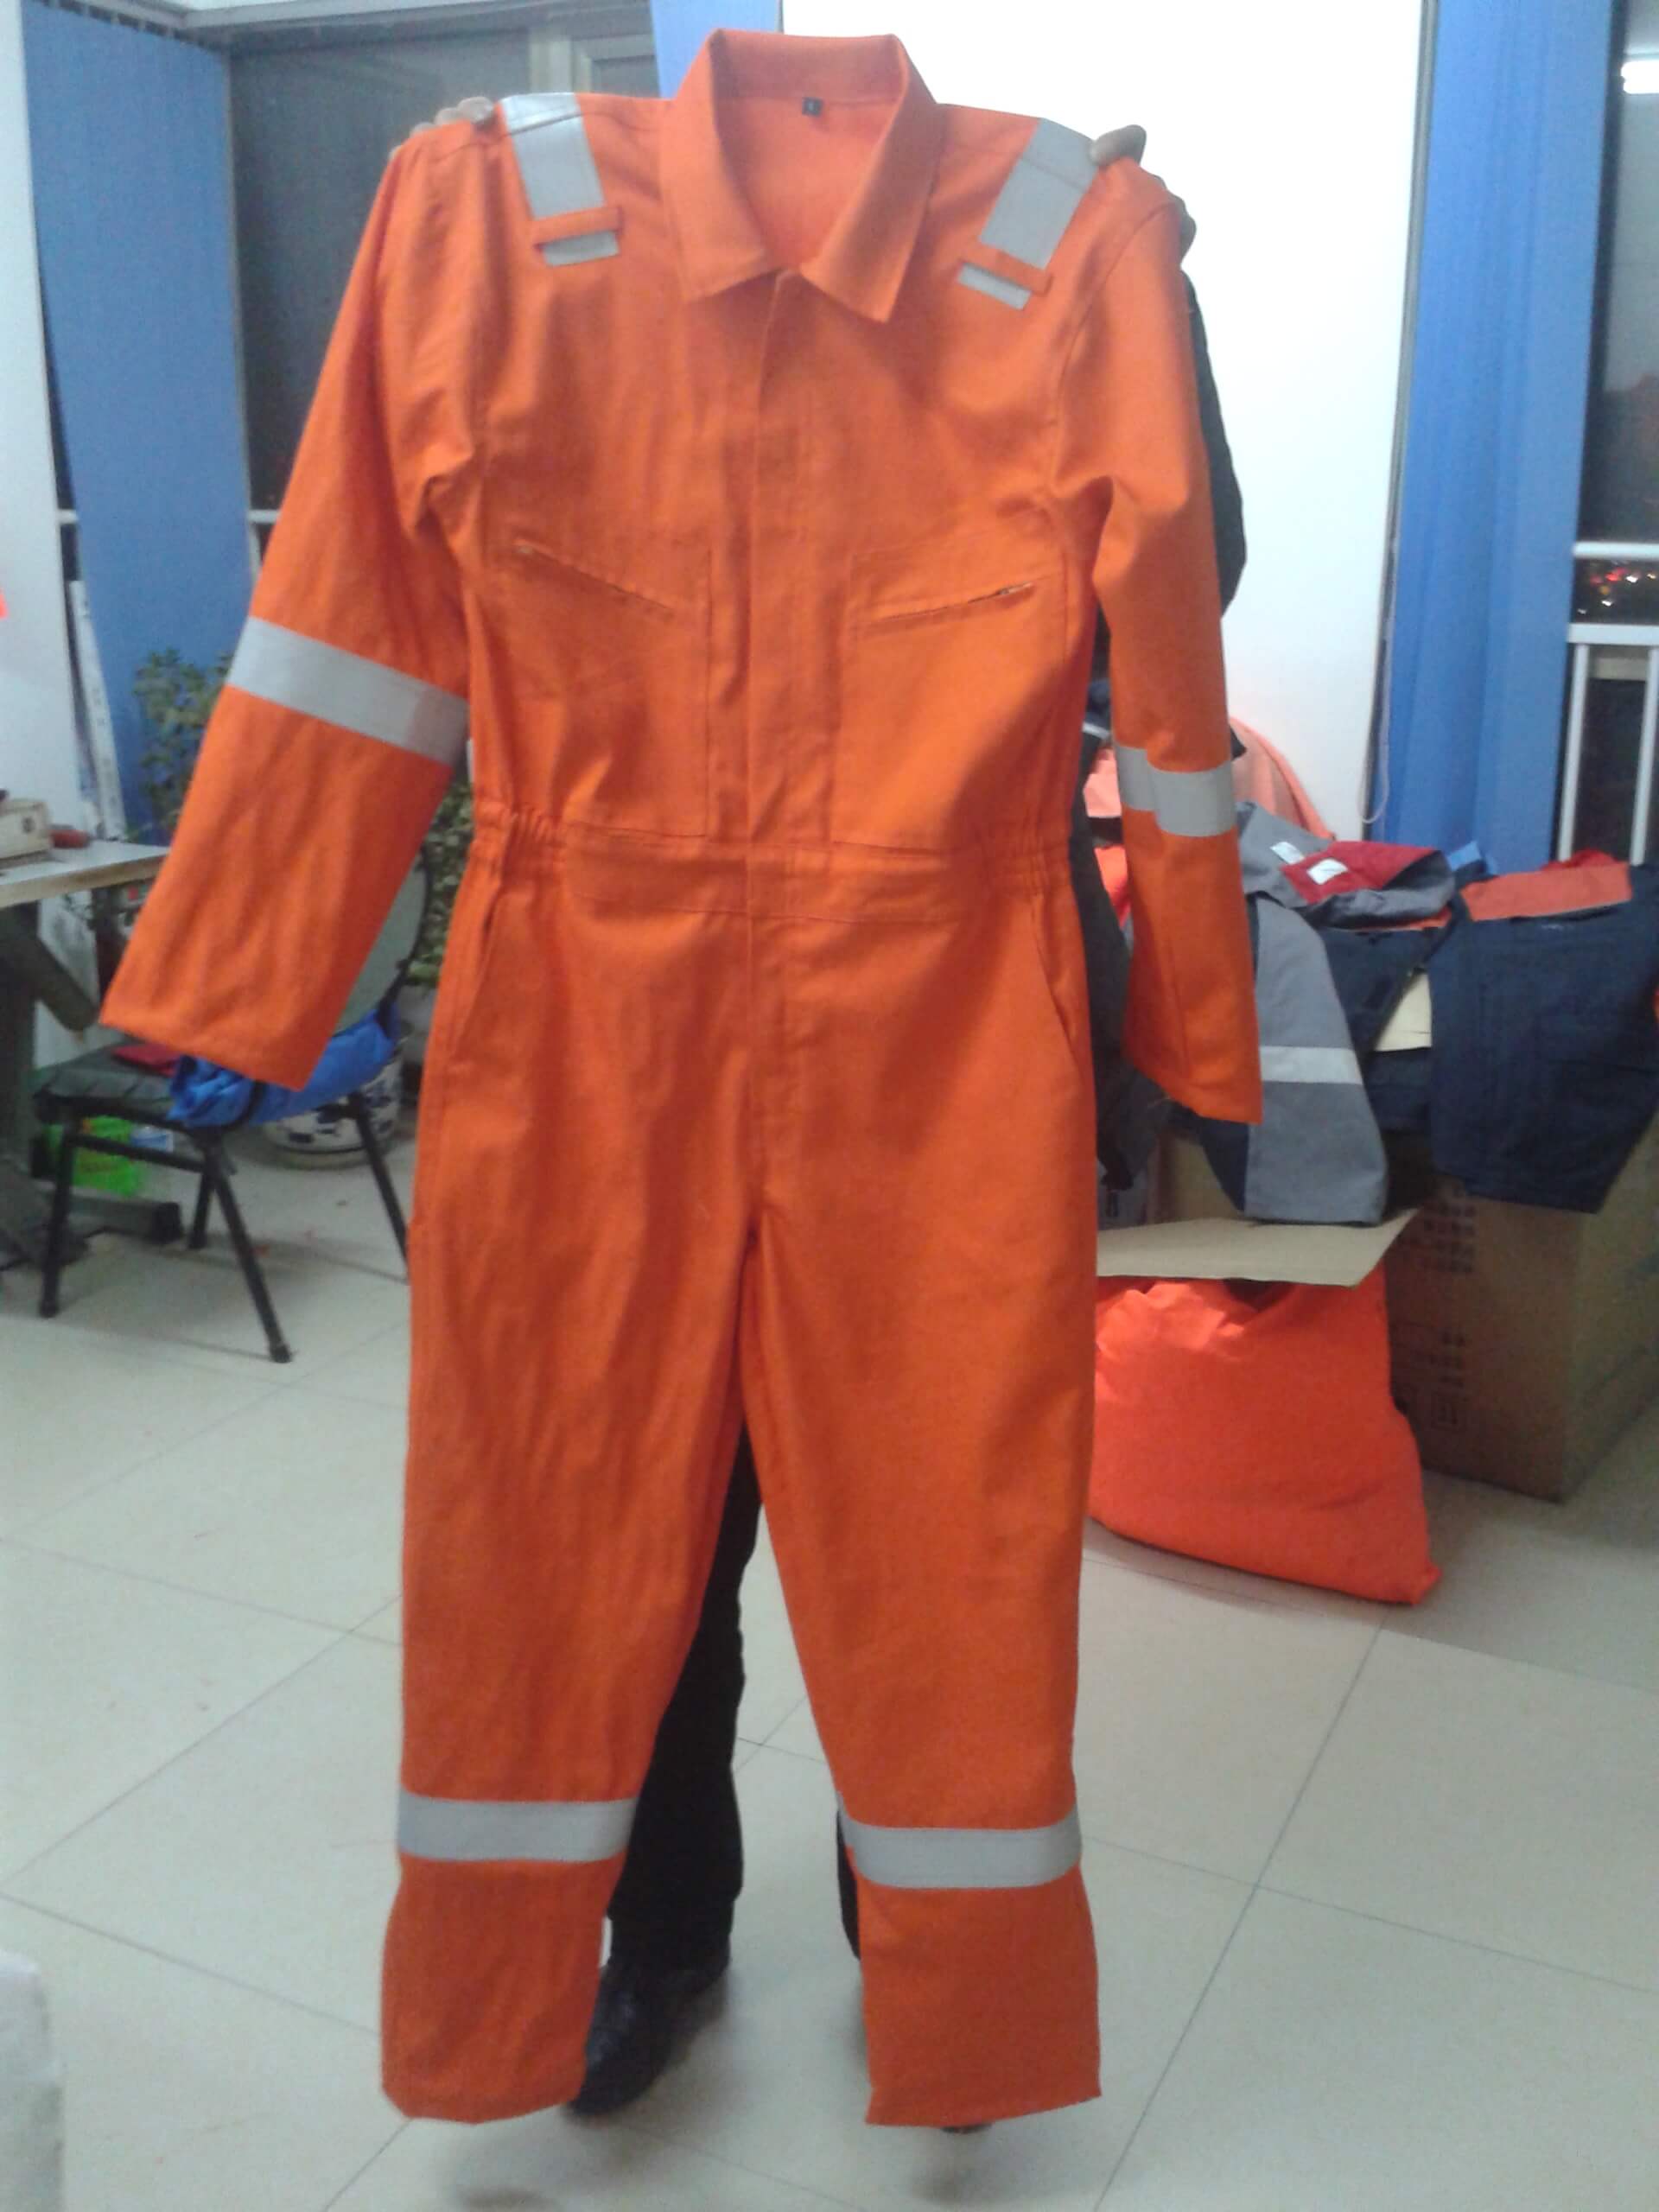 Aluminized Fire Protective Suit Aluminium Anti Radiation Fire Retardant Suit  - China Heat Reflect Suit and Flame Resistant Uniform price |  Made-in-China.com